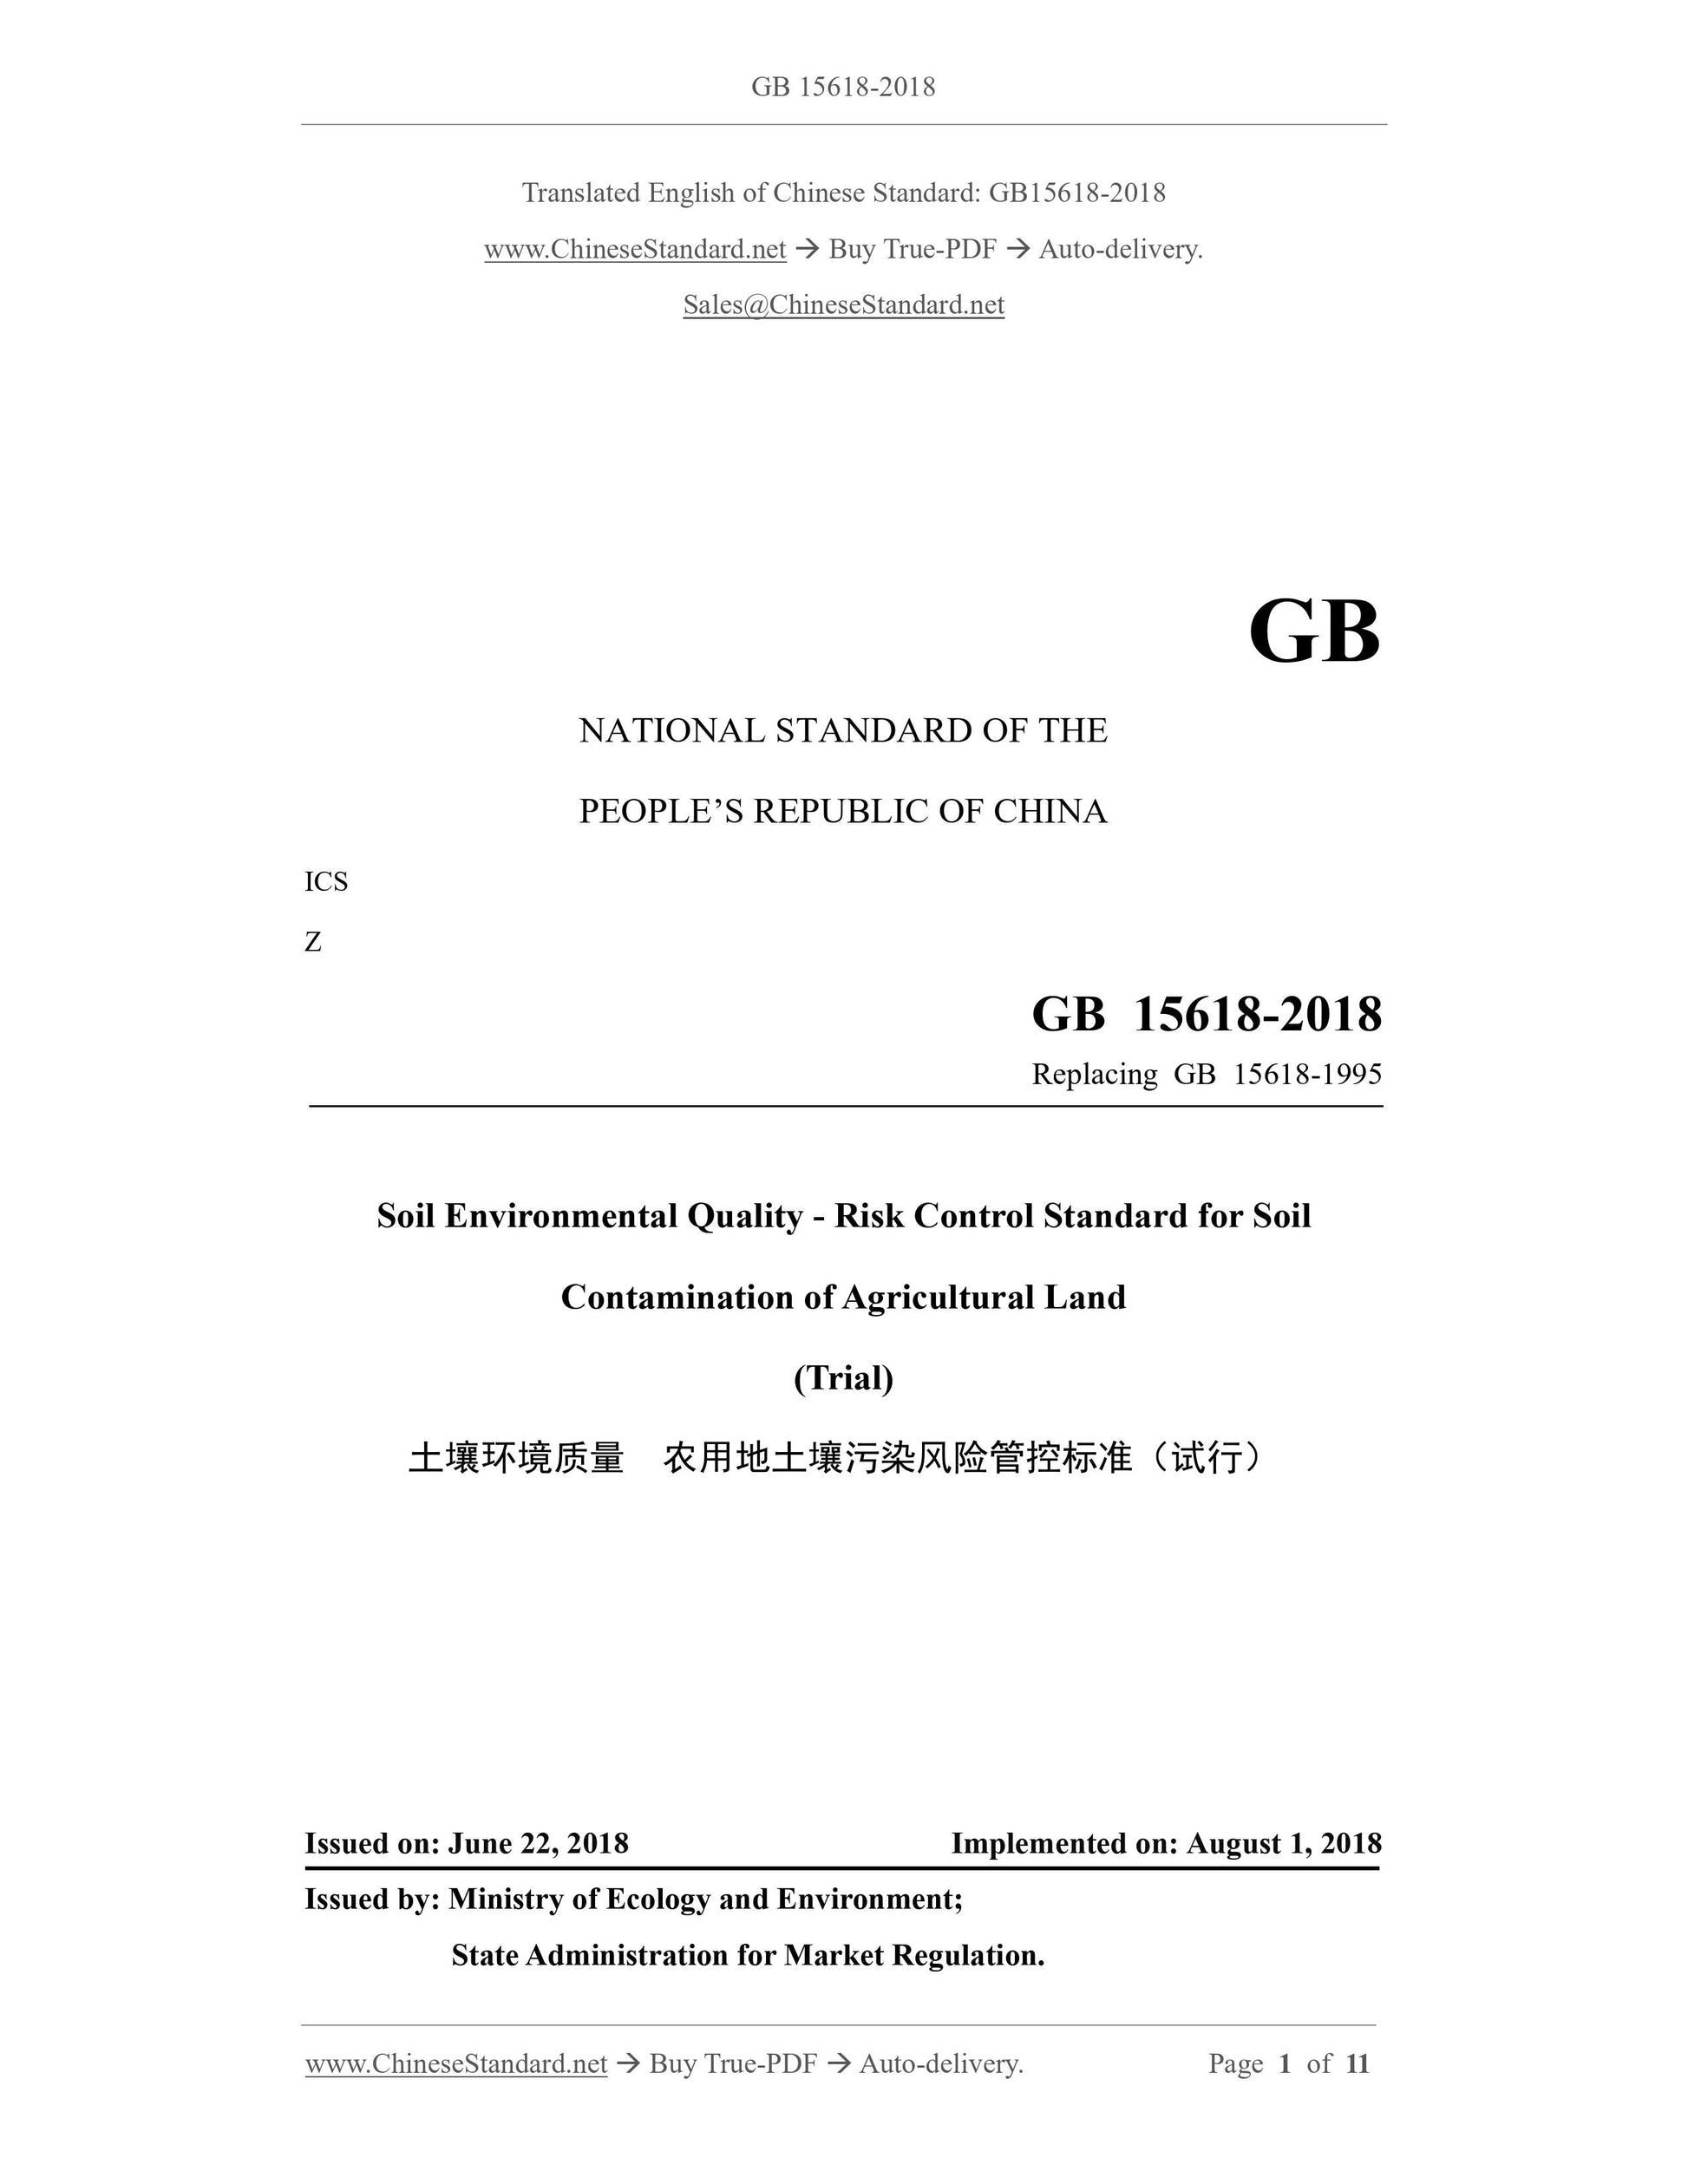 GB 15618-2018 Page 1